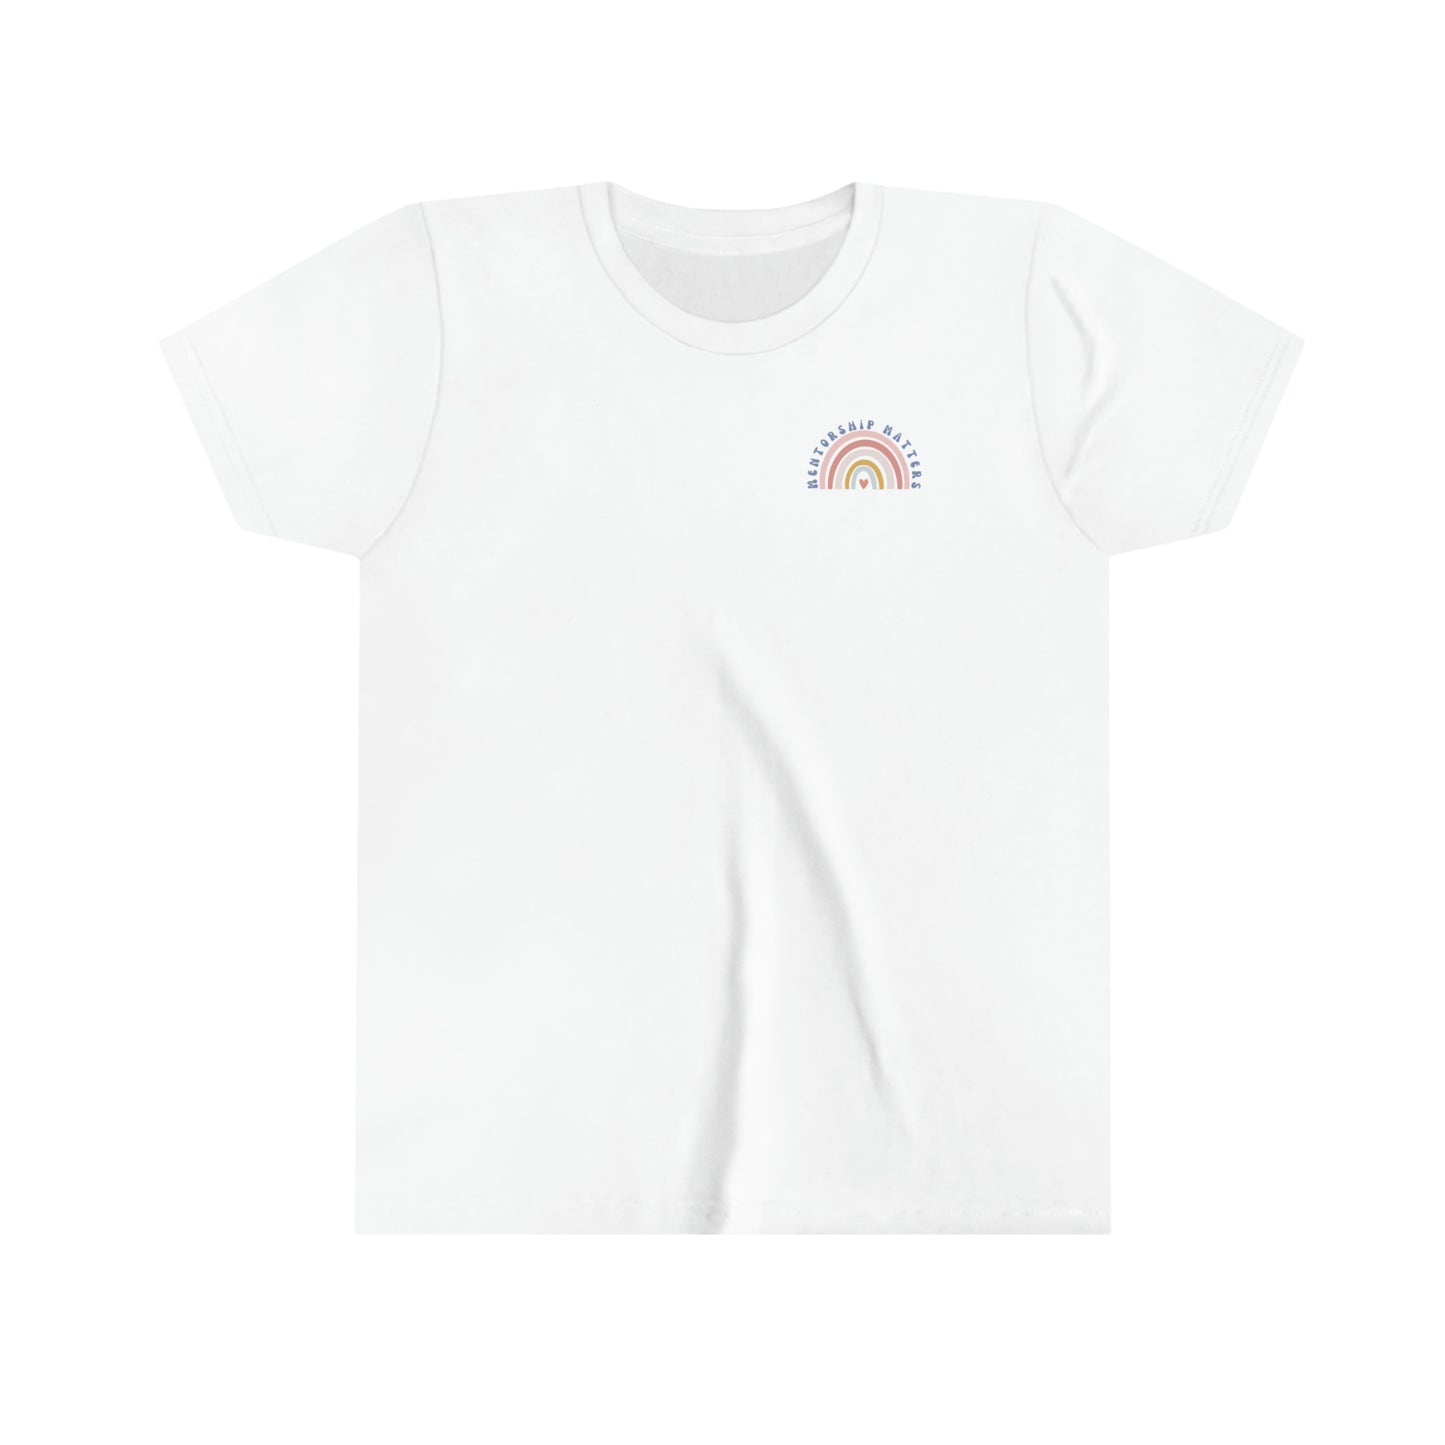 Mentorship Matters Youth Tee (Donates to a Nonprofit)